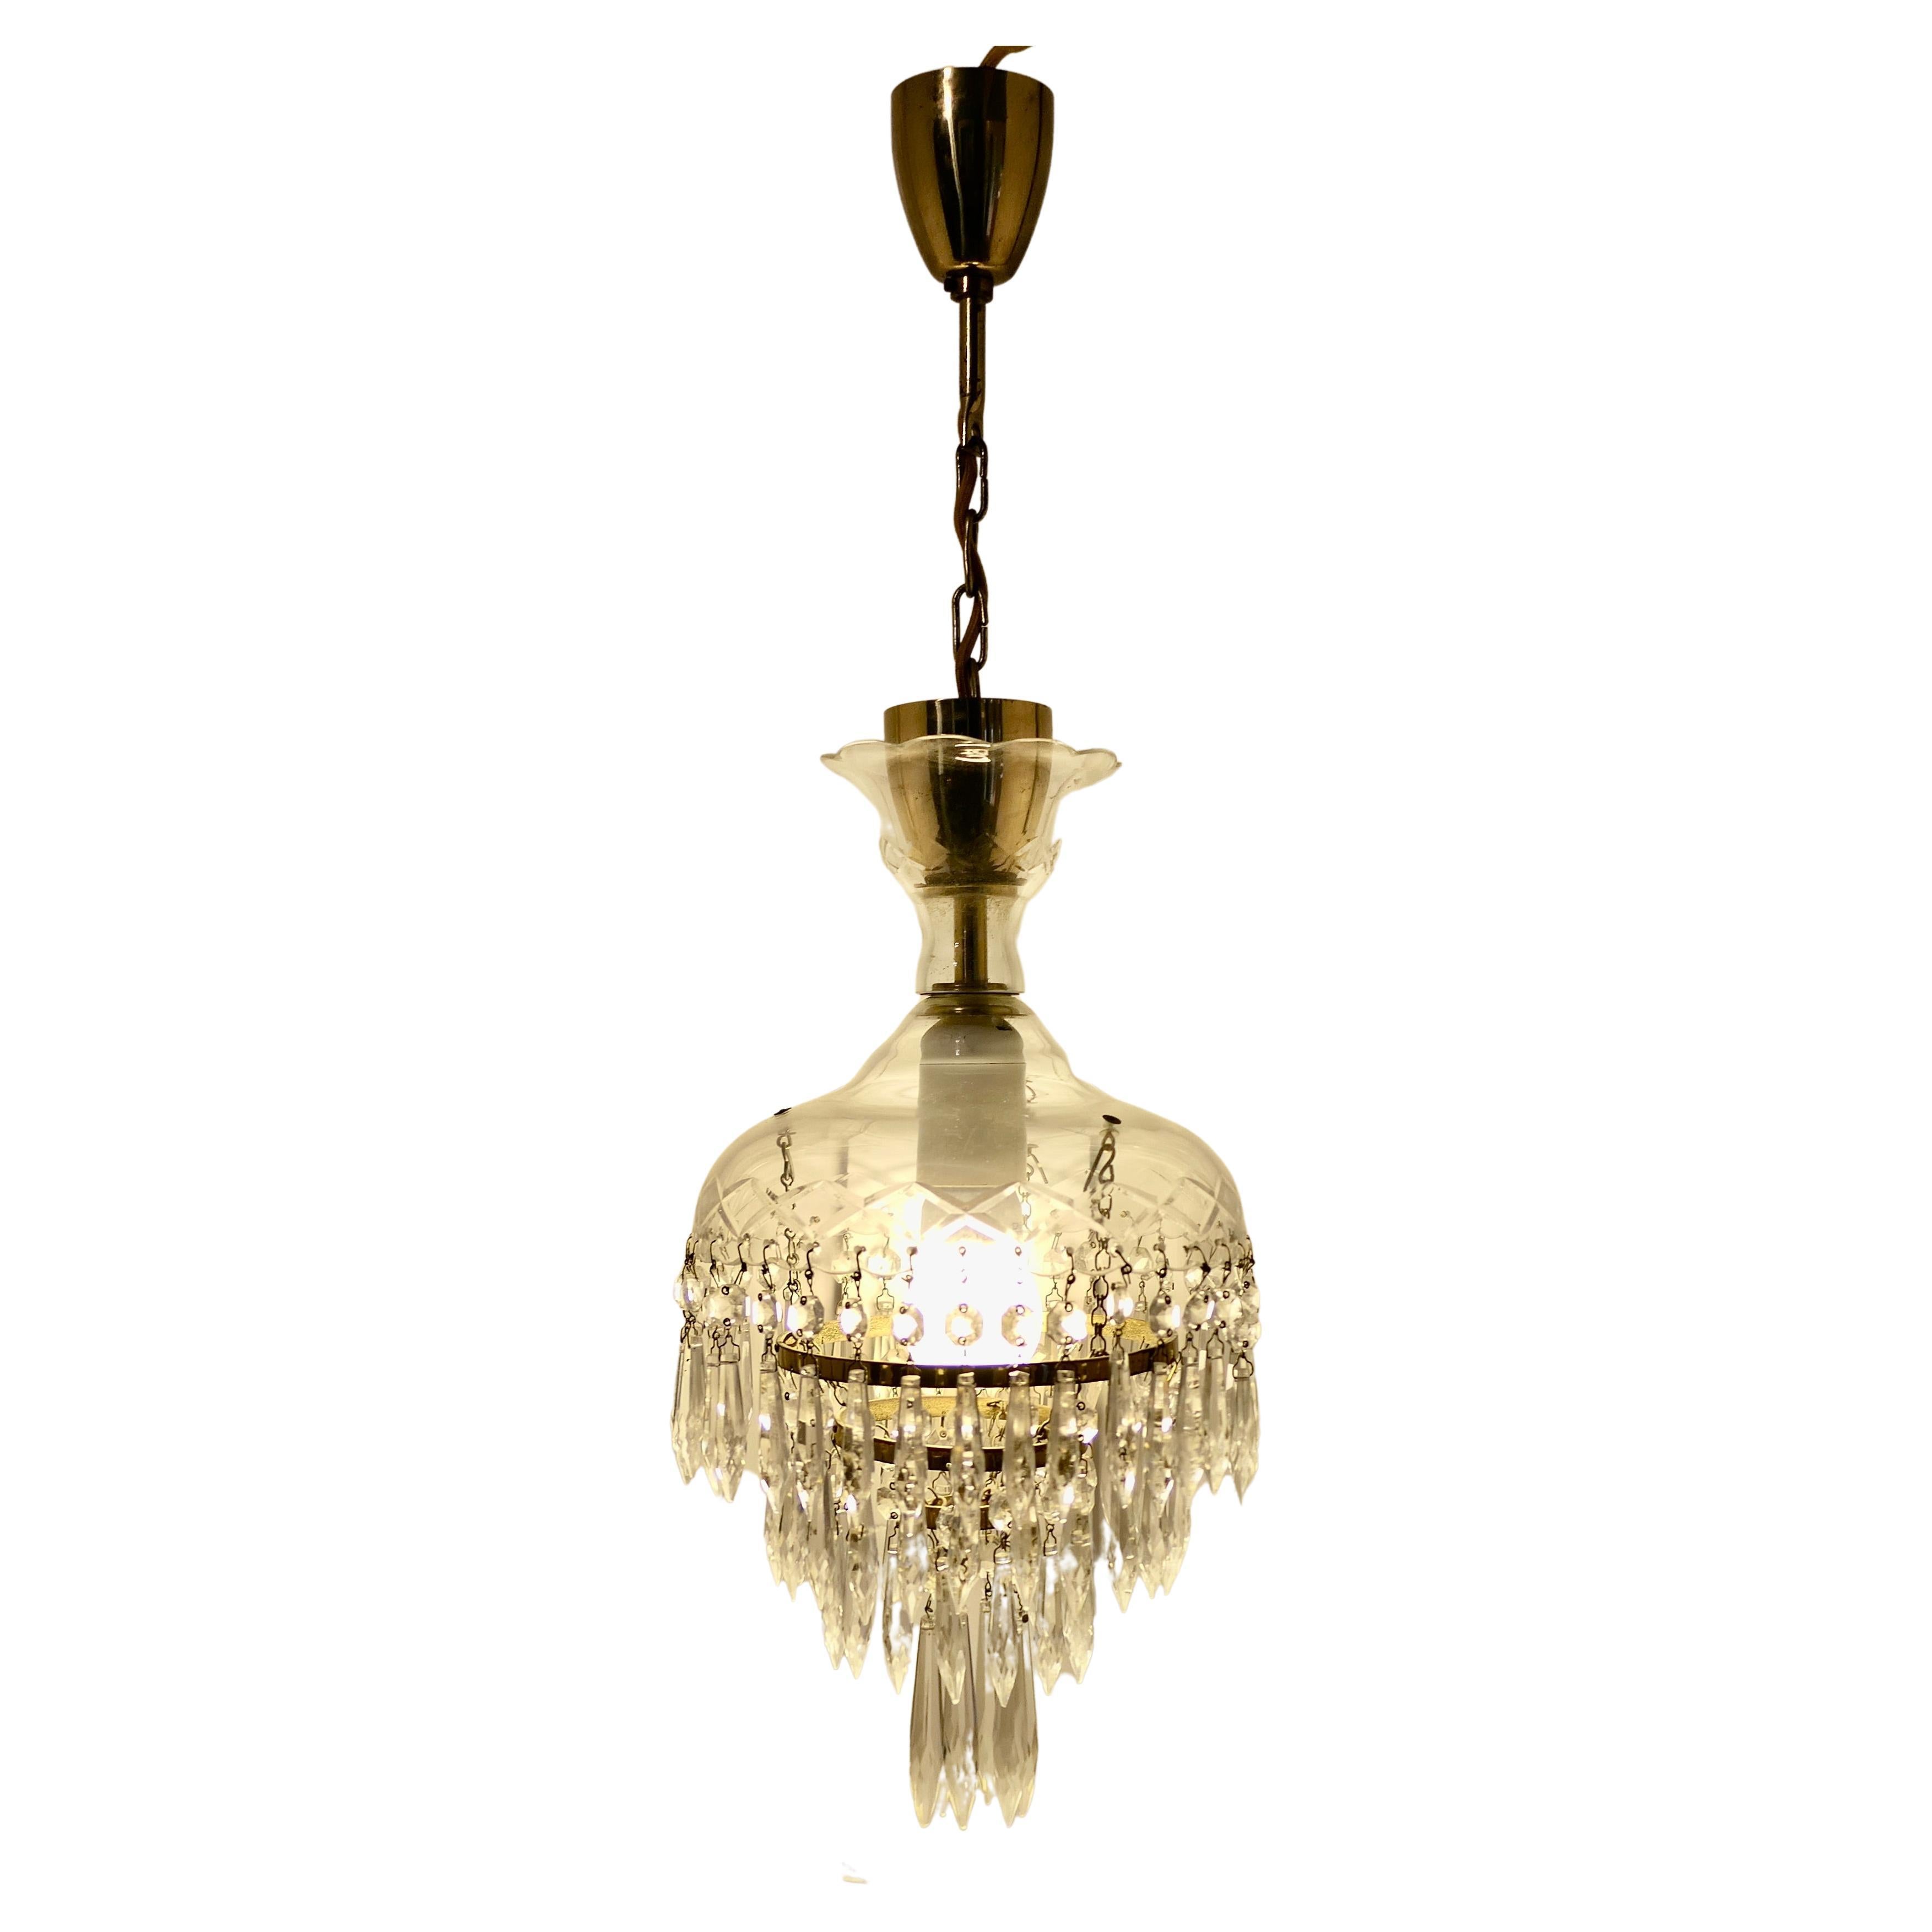 Large French Waterfall Crystal Chandelier   